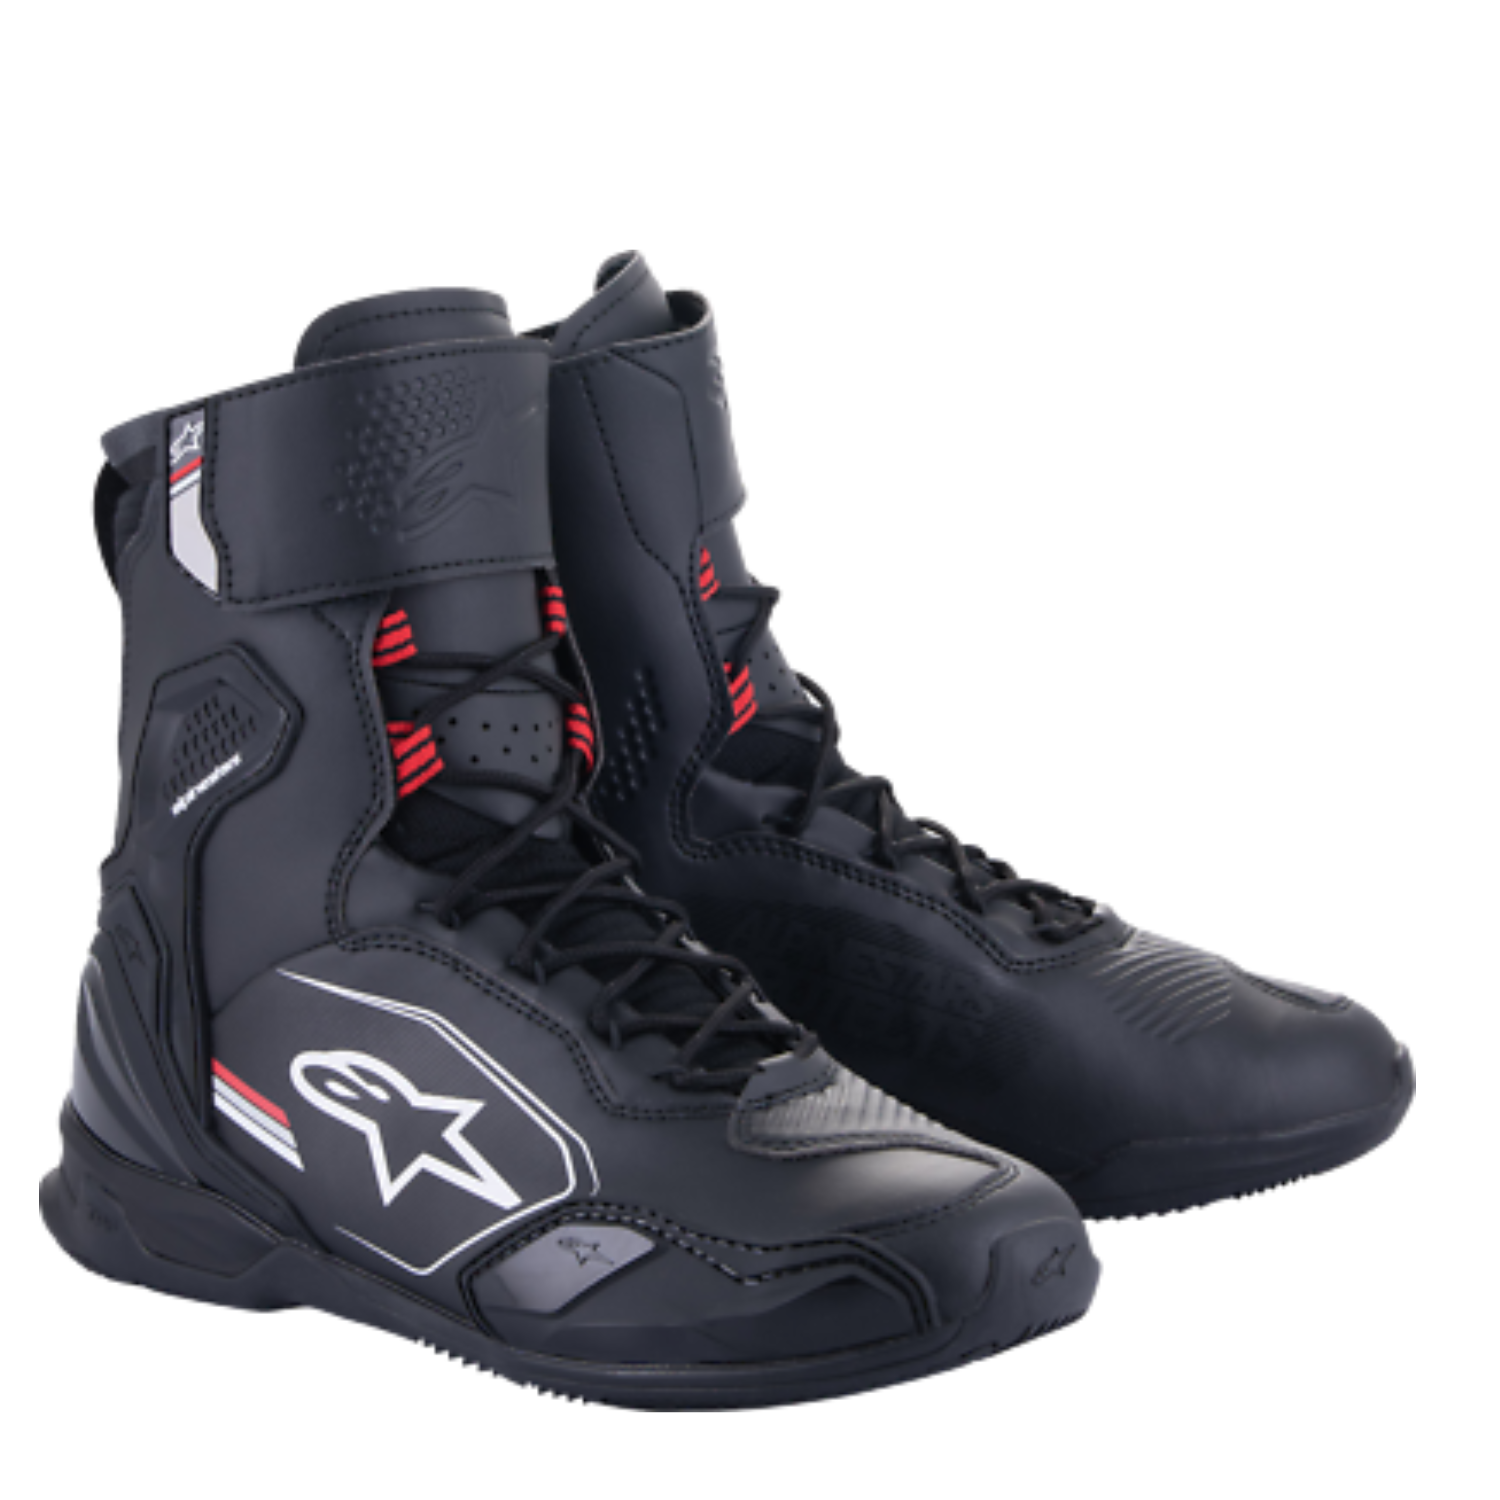 Image of EU Alpinestars Superfaster Shoes Black Gray Bright Red Taille US 10